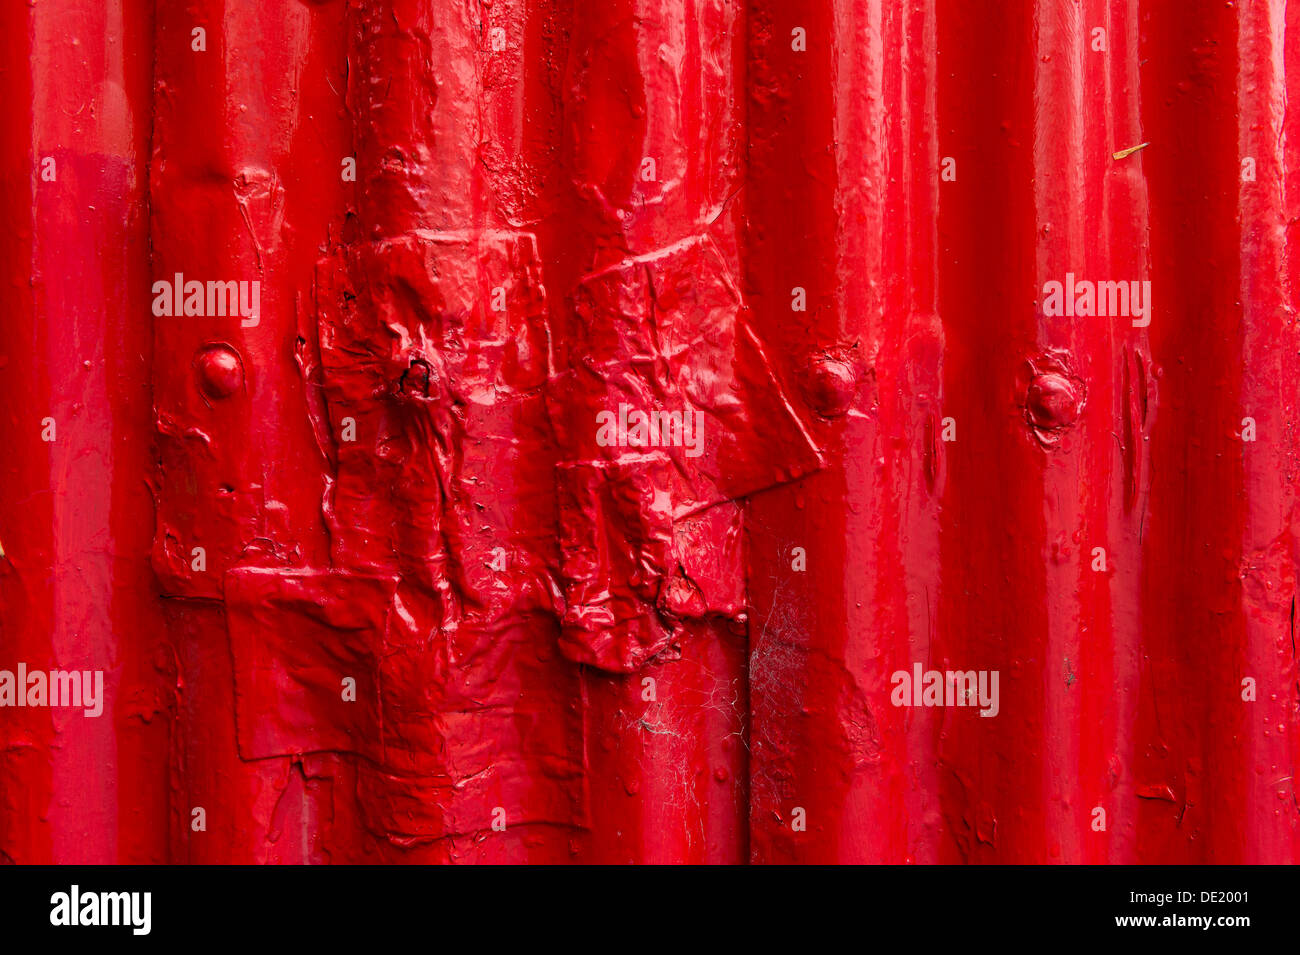 Corrugated iron, painted red, partially repaired Stock Photo